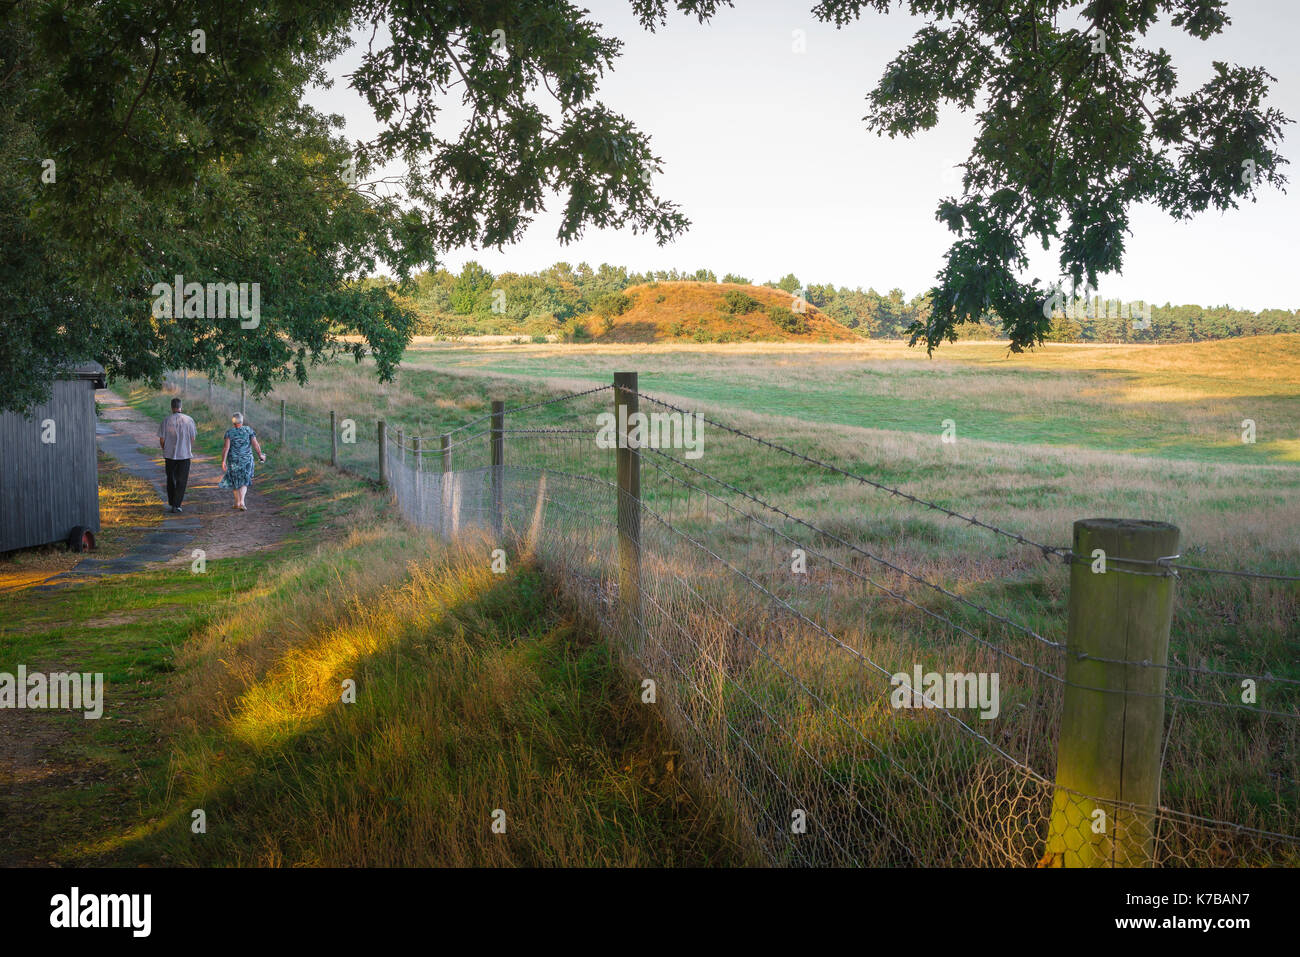 Sutton Hoo Suffolk, view of a middle aged couple walking on a visitors' path with an Anglo Saxon burial mound in the background, Suffolk, England. Stock Photo